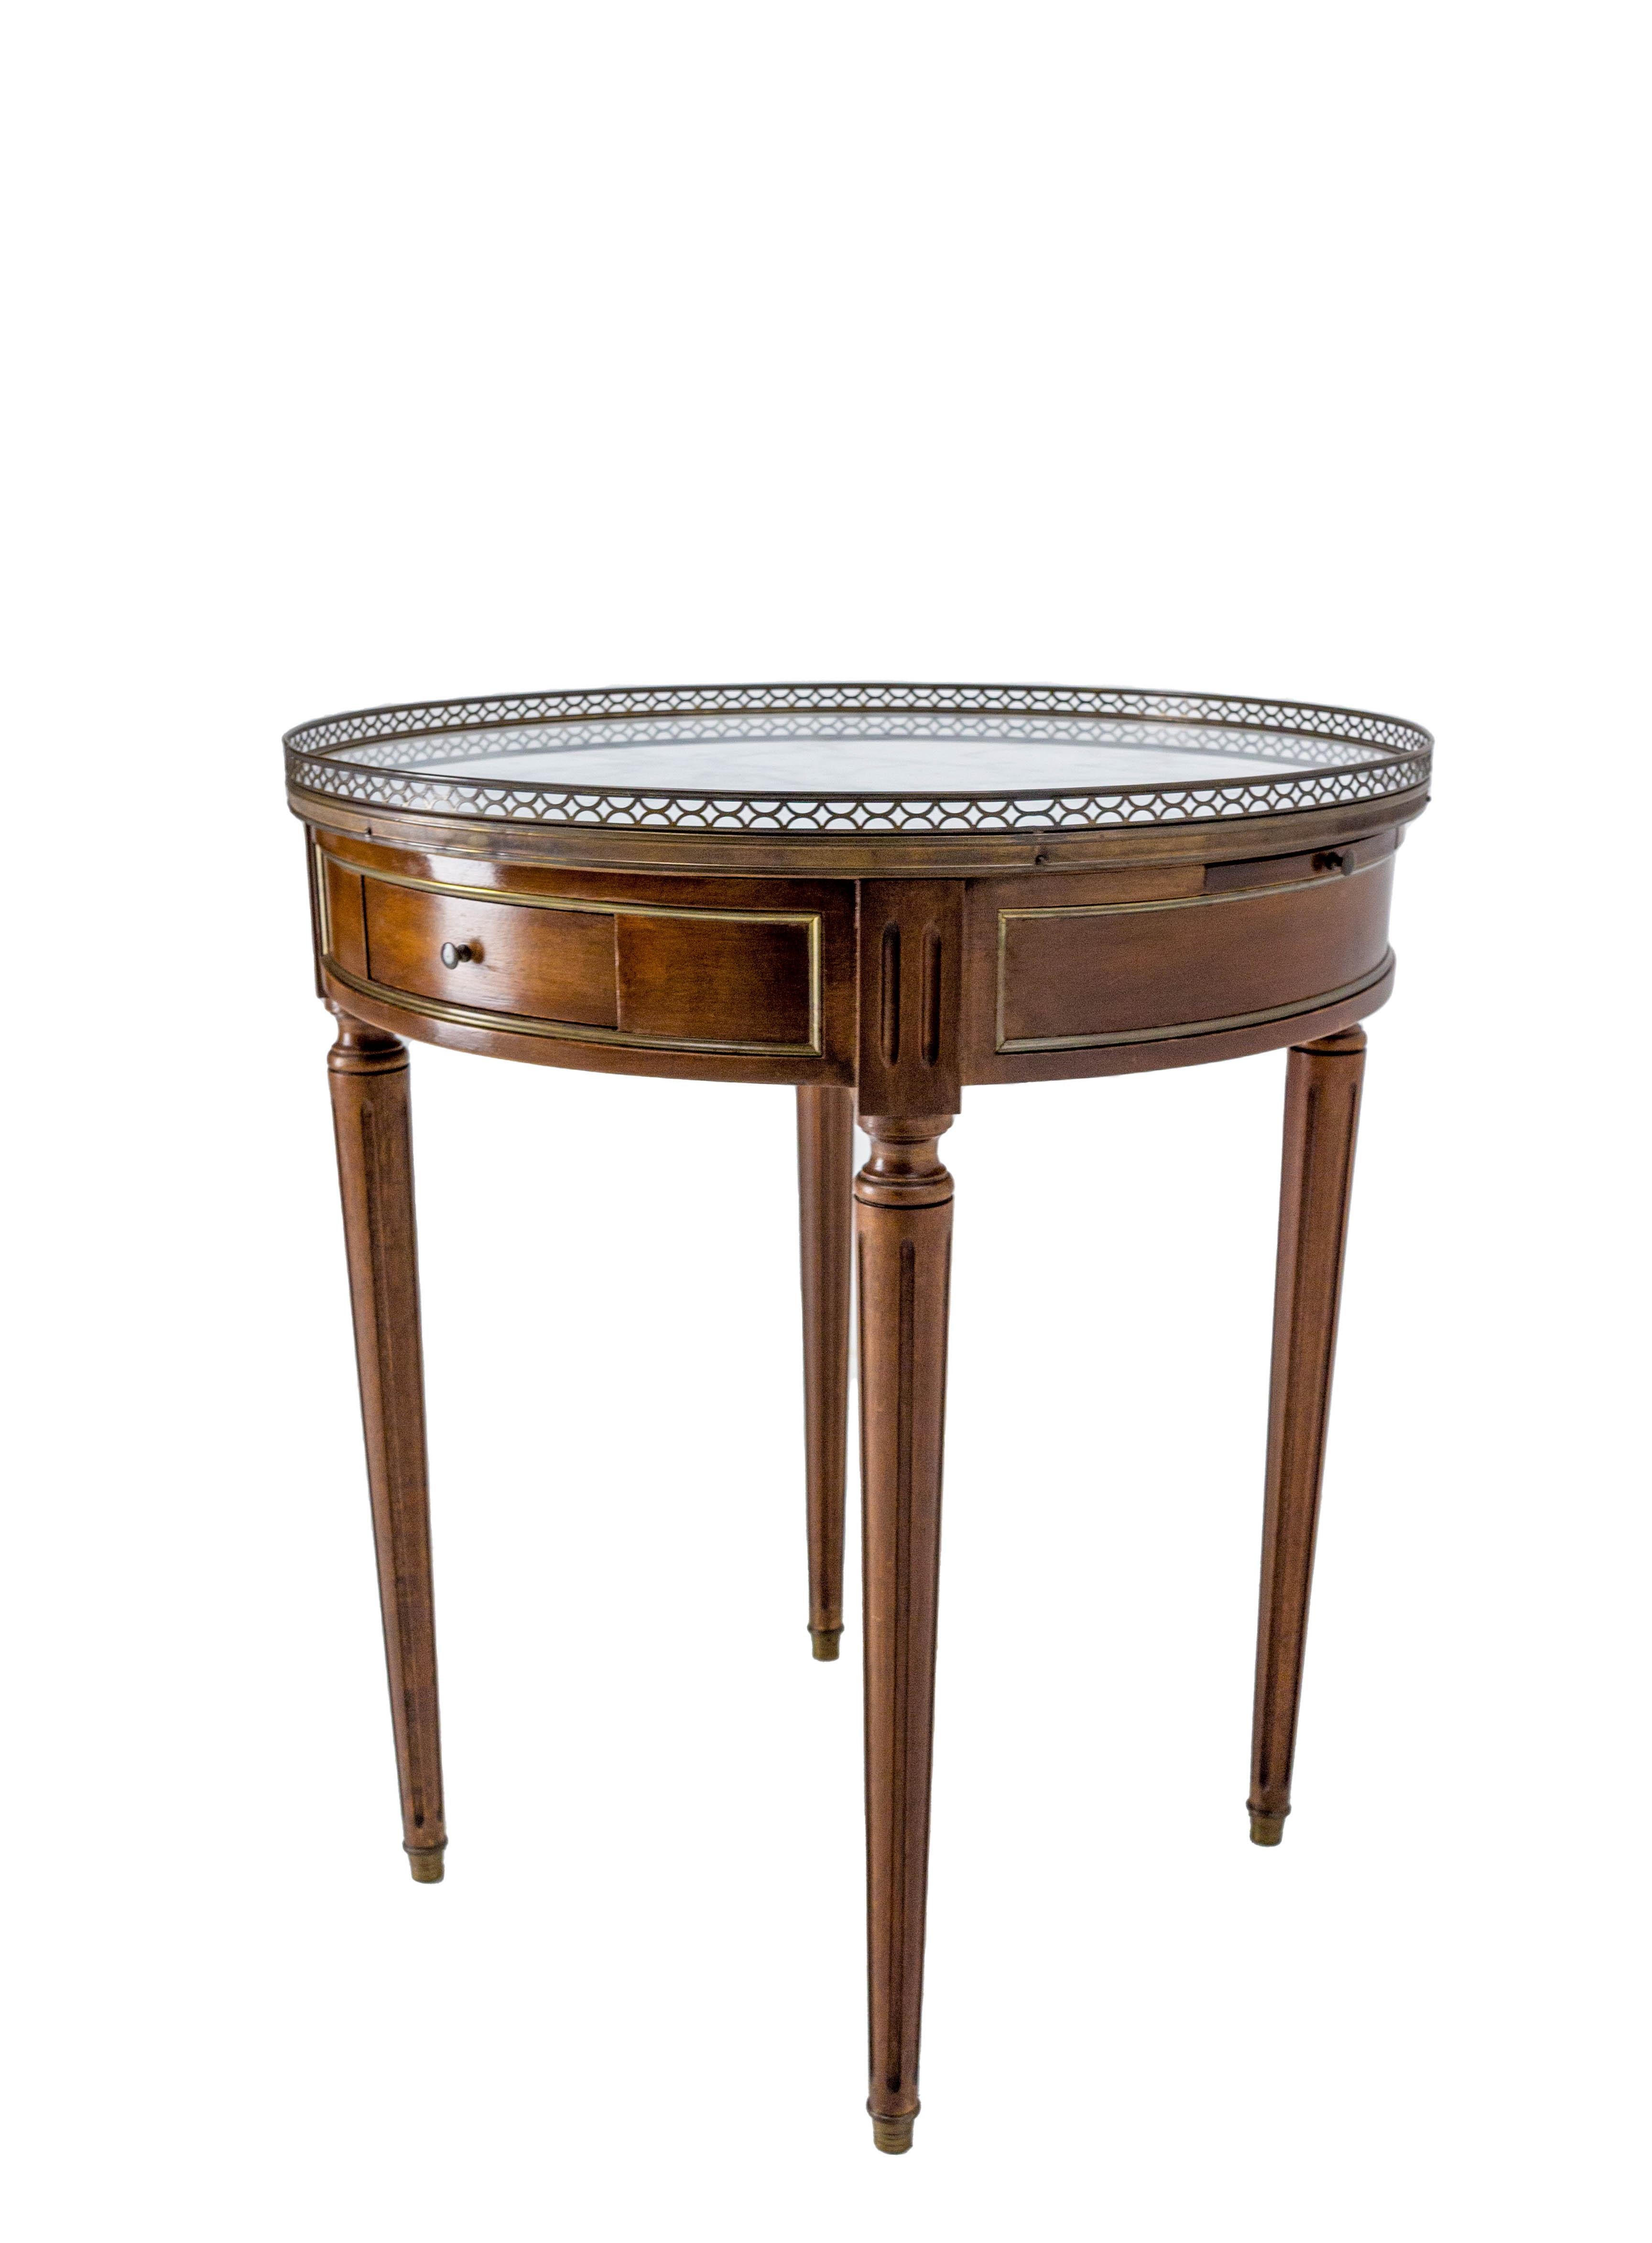 Pair of French Louis XVI style bouillotte table with variegated marble-top. 
Brass gallery and fluted legs finished with ormolu feet 
Two drawers and two pull-out tirelles slides.
The name “bouillotte” comes from a French gambling card game that